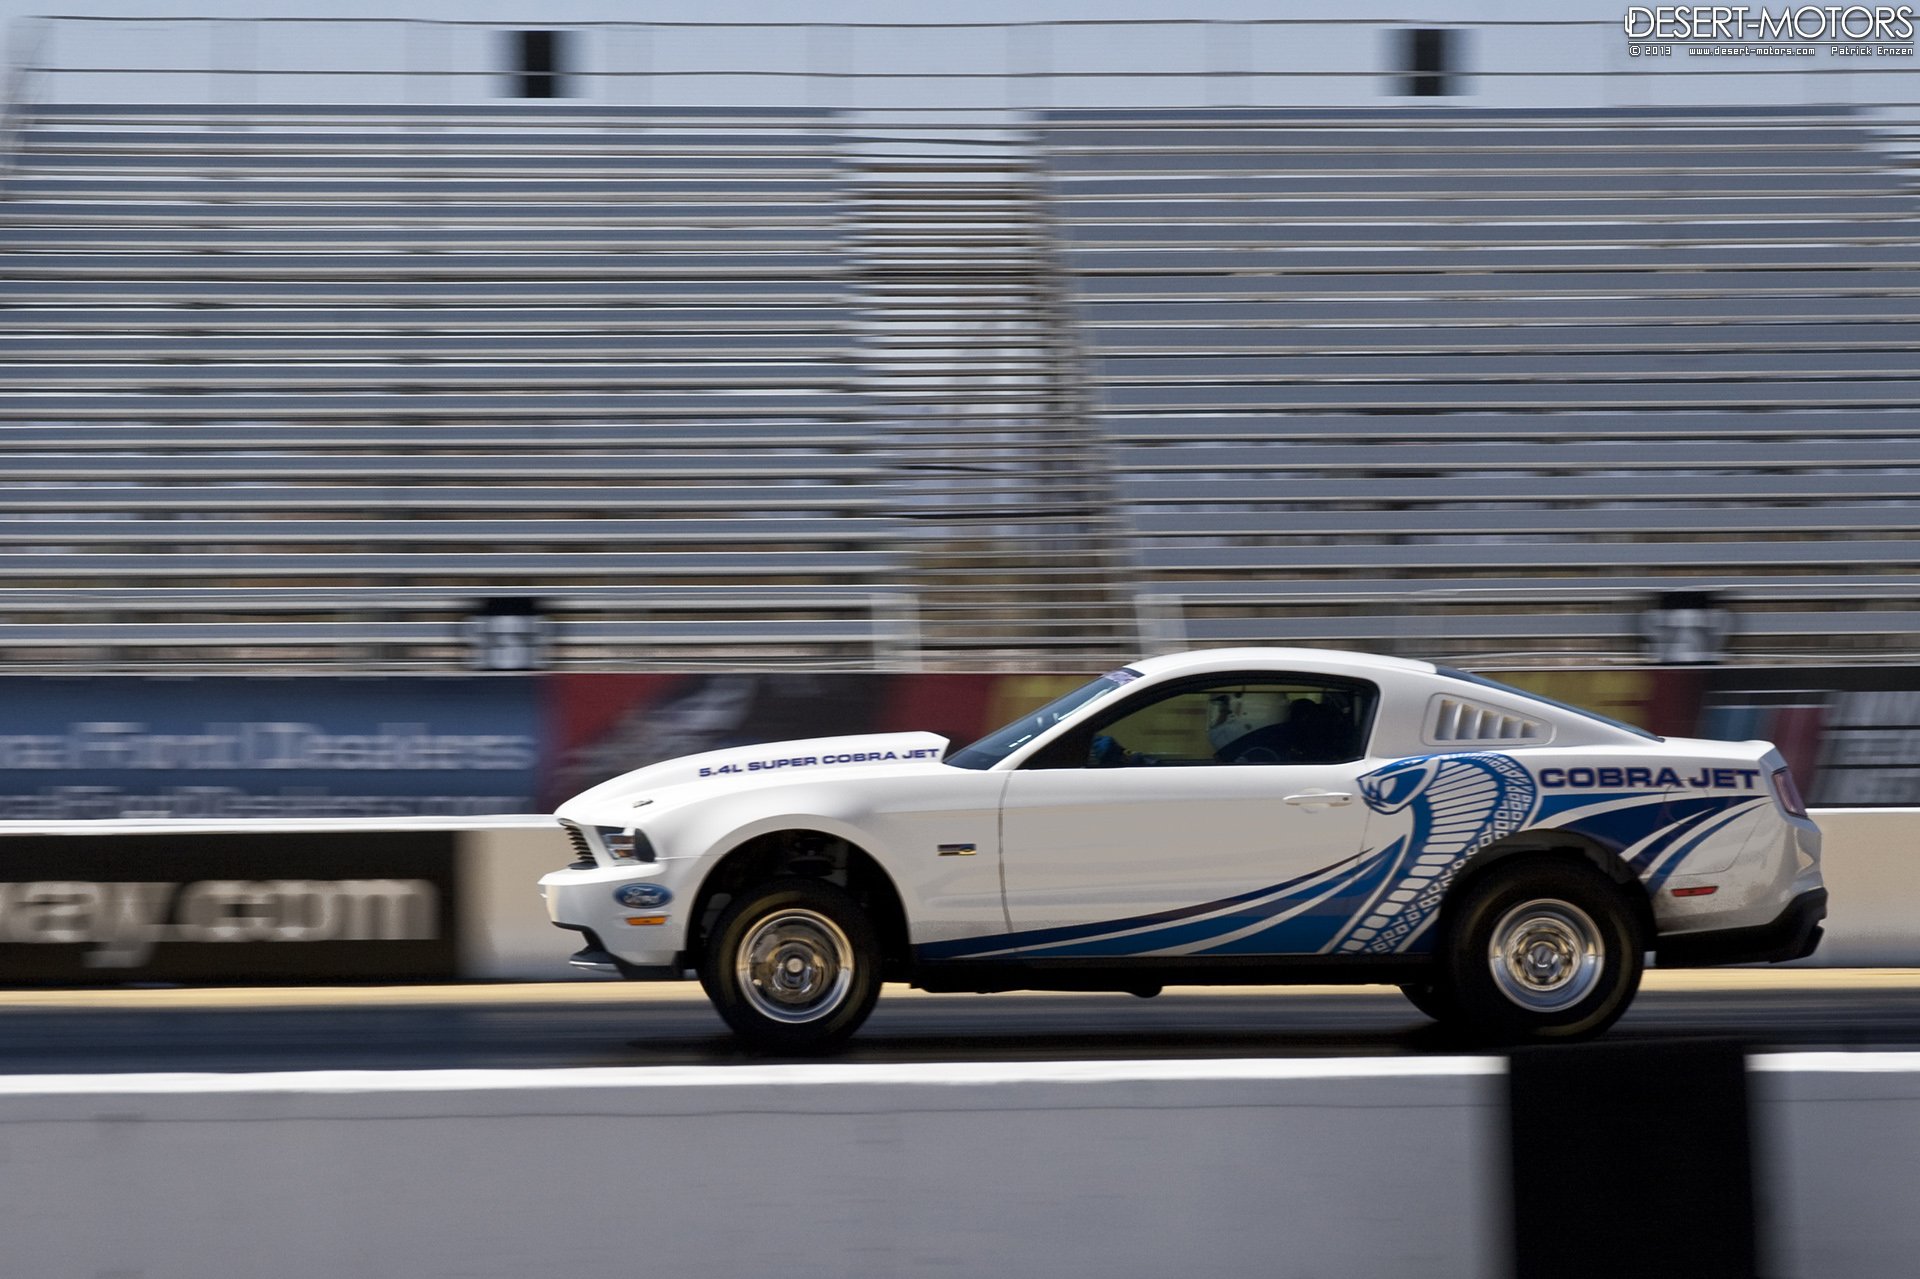 2012, Ford, Mustang, Super, Cobra, Jet, Hot, Rod, Rods, Muscle, Drag, Race, Racing Wallpaper